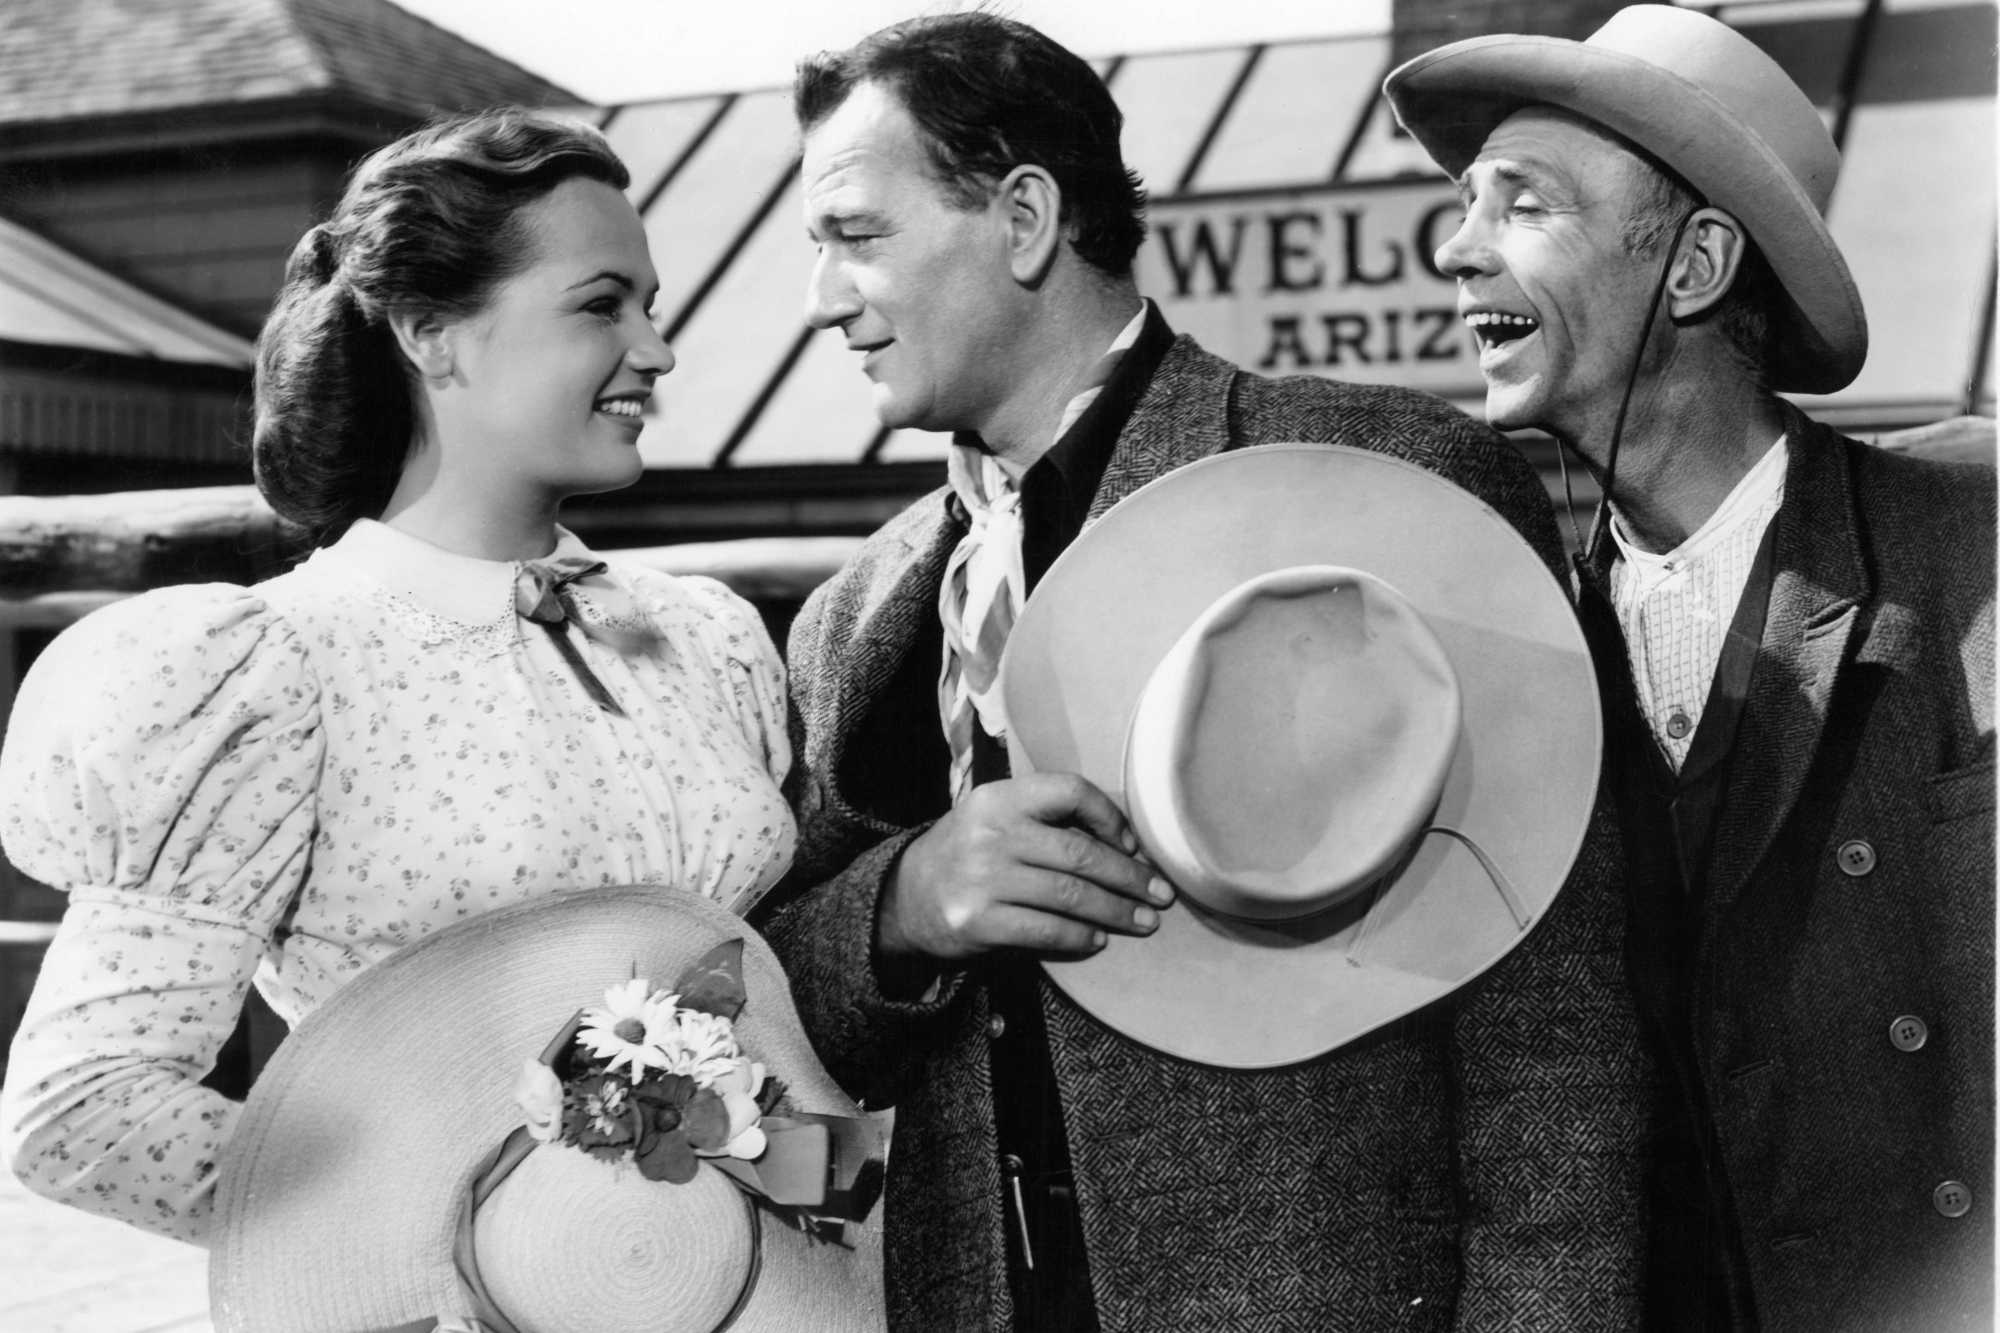 '3 Godfathers' Dorothy Ford as Ruby Latham and John Wayne as Robert Marmaduke Sangster Hightower. Wayne and Ford are looking into each other's eyes, while a man watches.